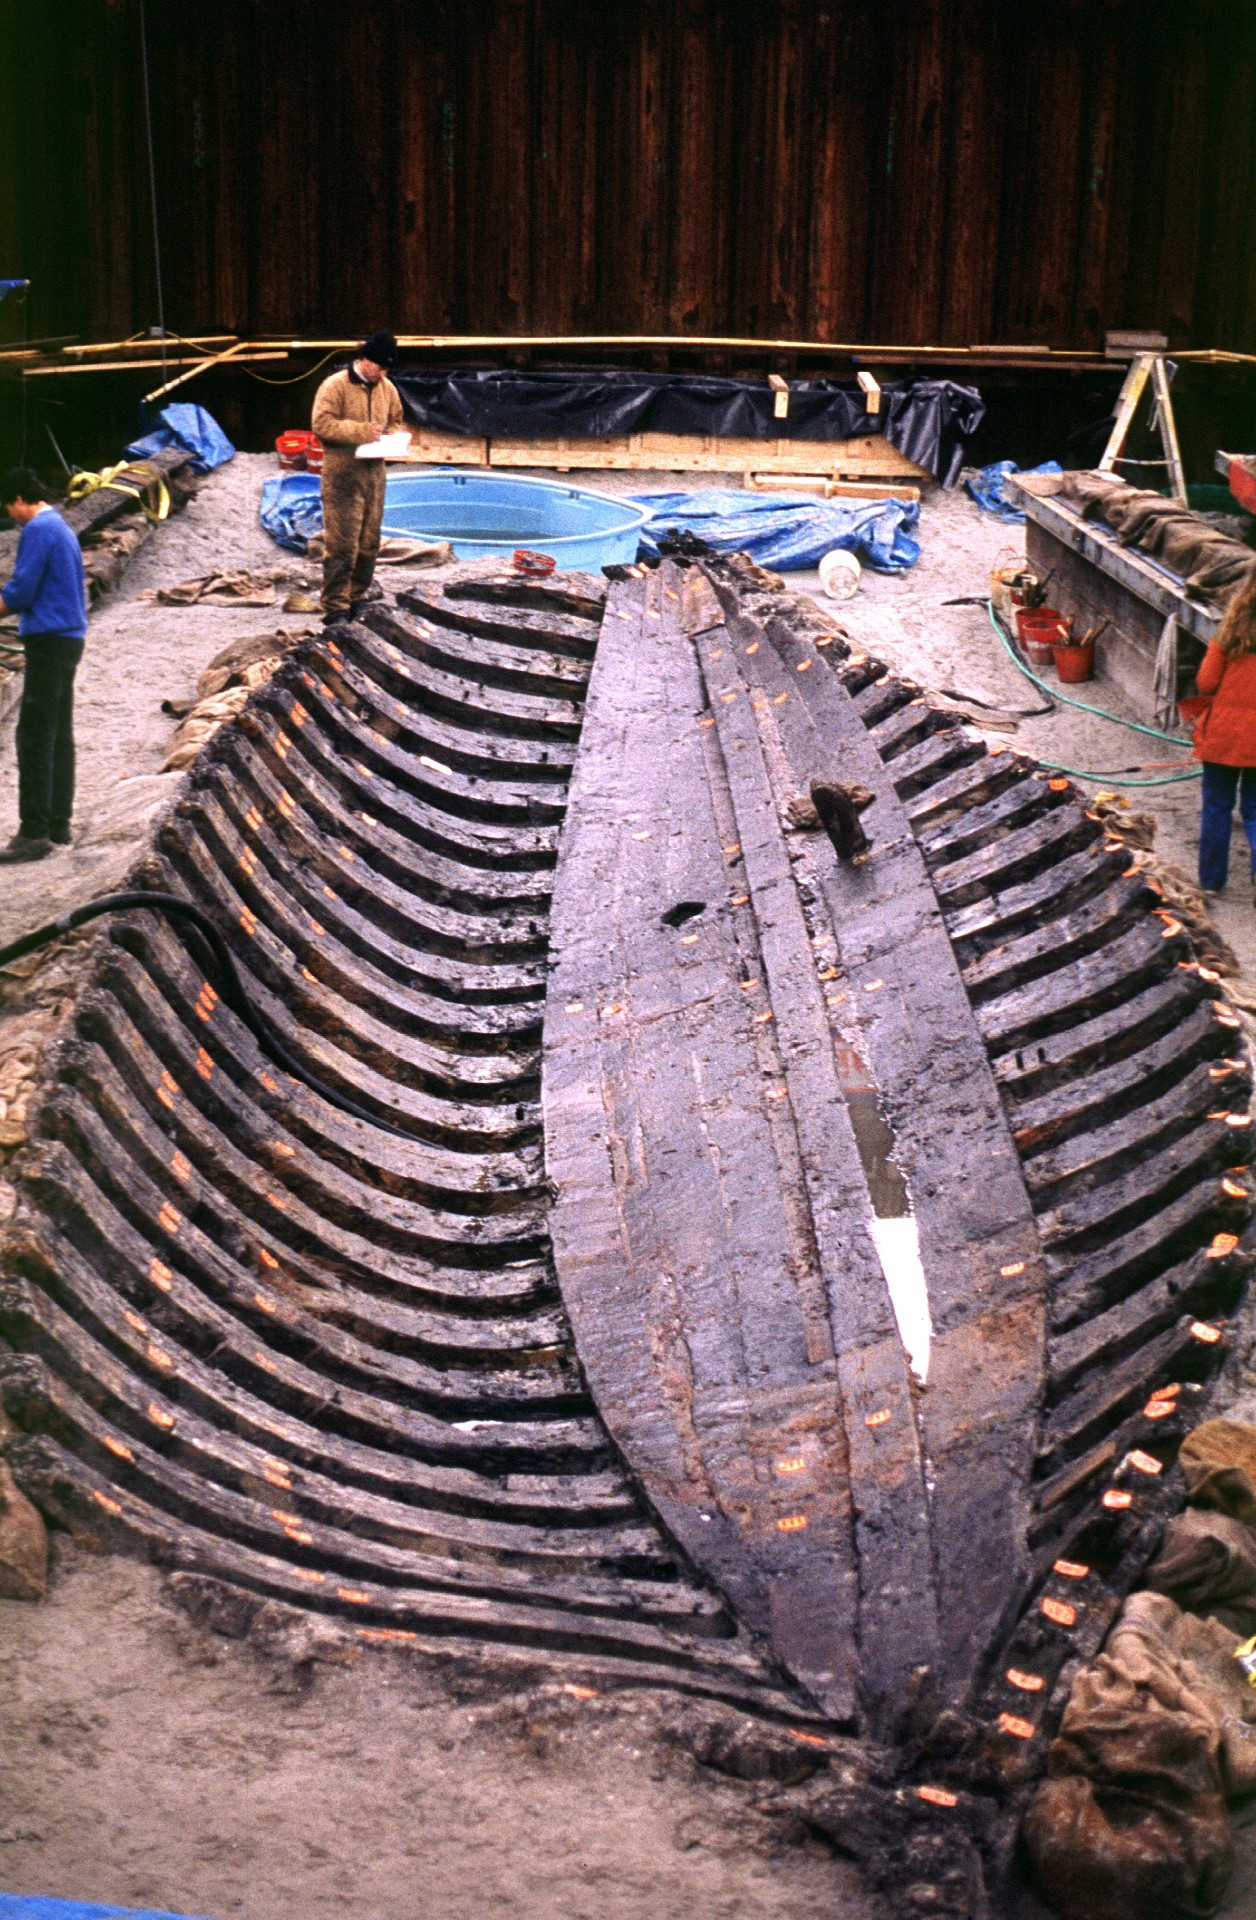 With the water from Matagorda Bay pumped out of the cofferdam surrounding the shipwreck, archaeologists from the Texas Historical Commission were able to conduct a dry land excavation of La Belle. Museum of the Coastal Bend Victoria, TX